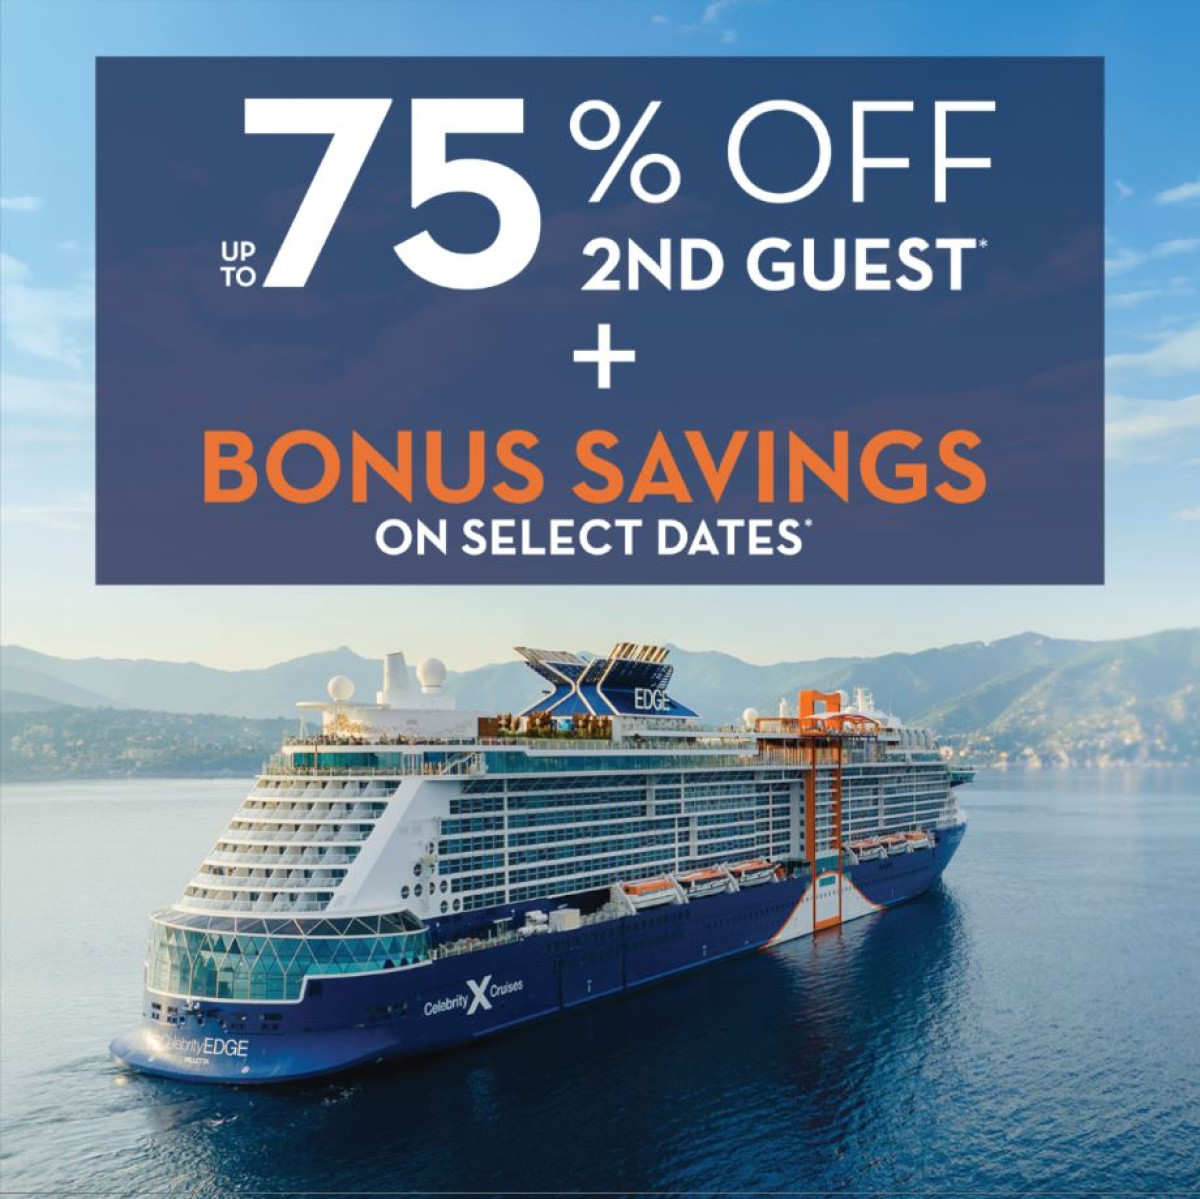 Celebrity Cruises Save up to 75% Off 2nd Guest + Bonus Savings